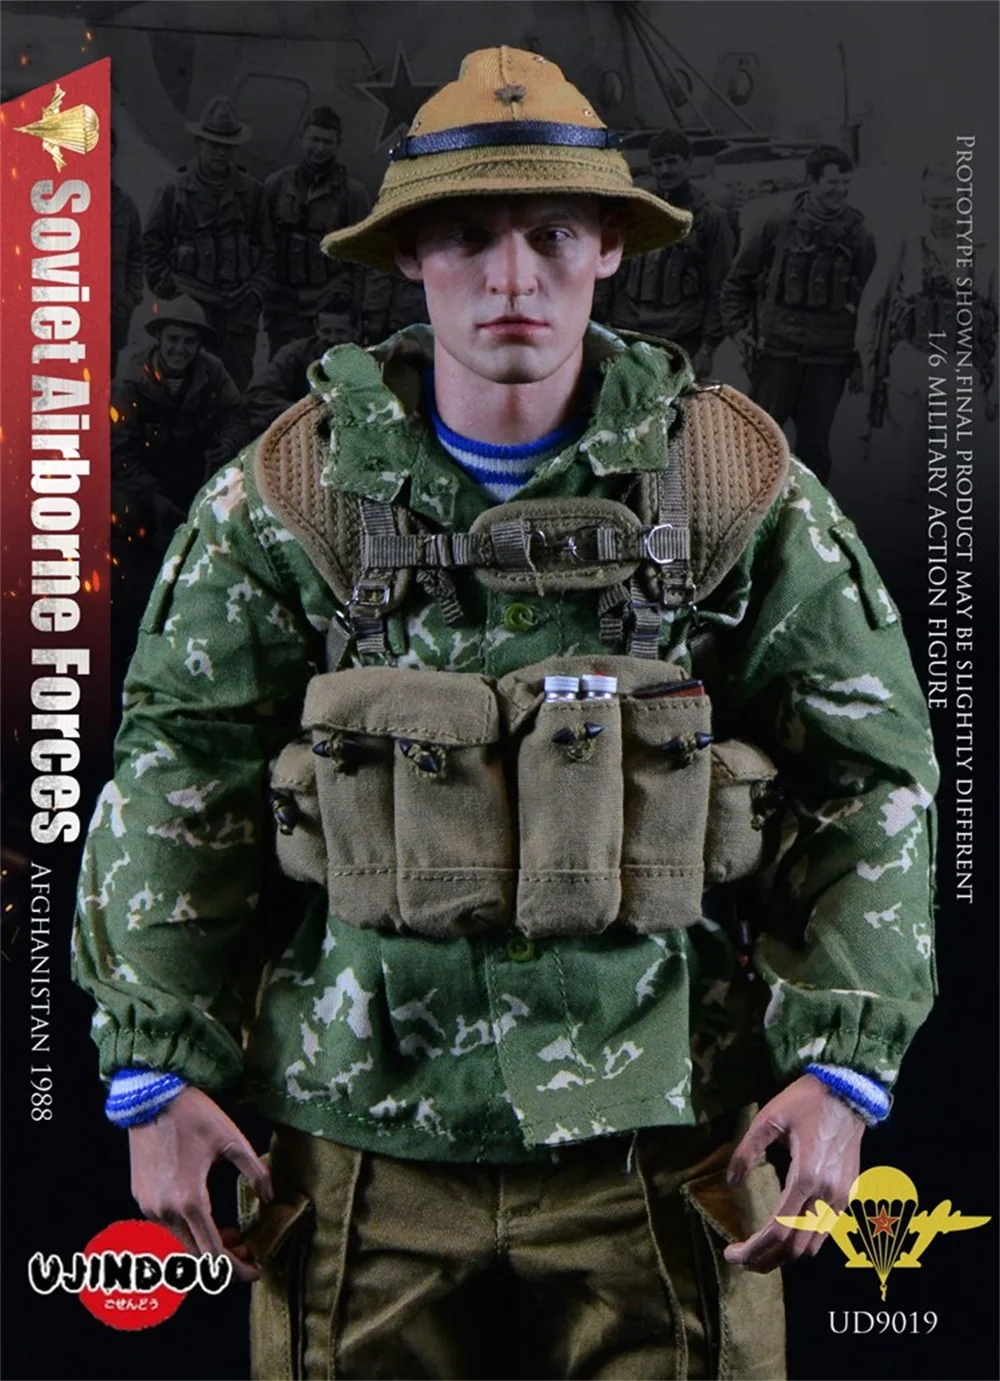 

UJINDOU UD9019 Toys Model Soviet Army Troops "VDV" in Afghanistan Full Set Moveable Action Figure For Fans Collectable 1/6